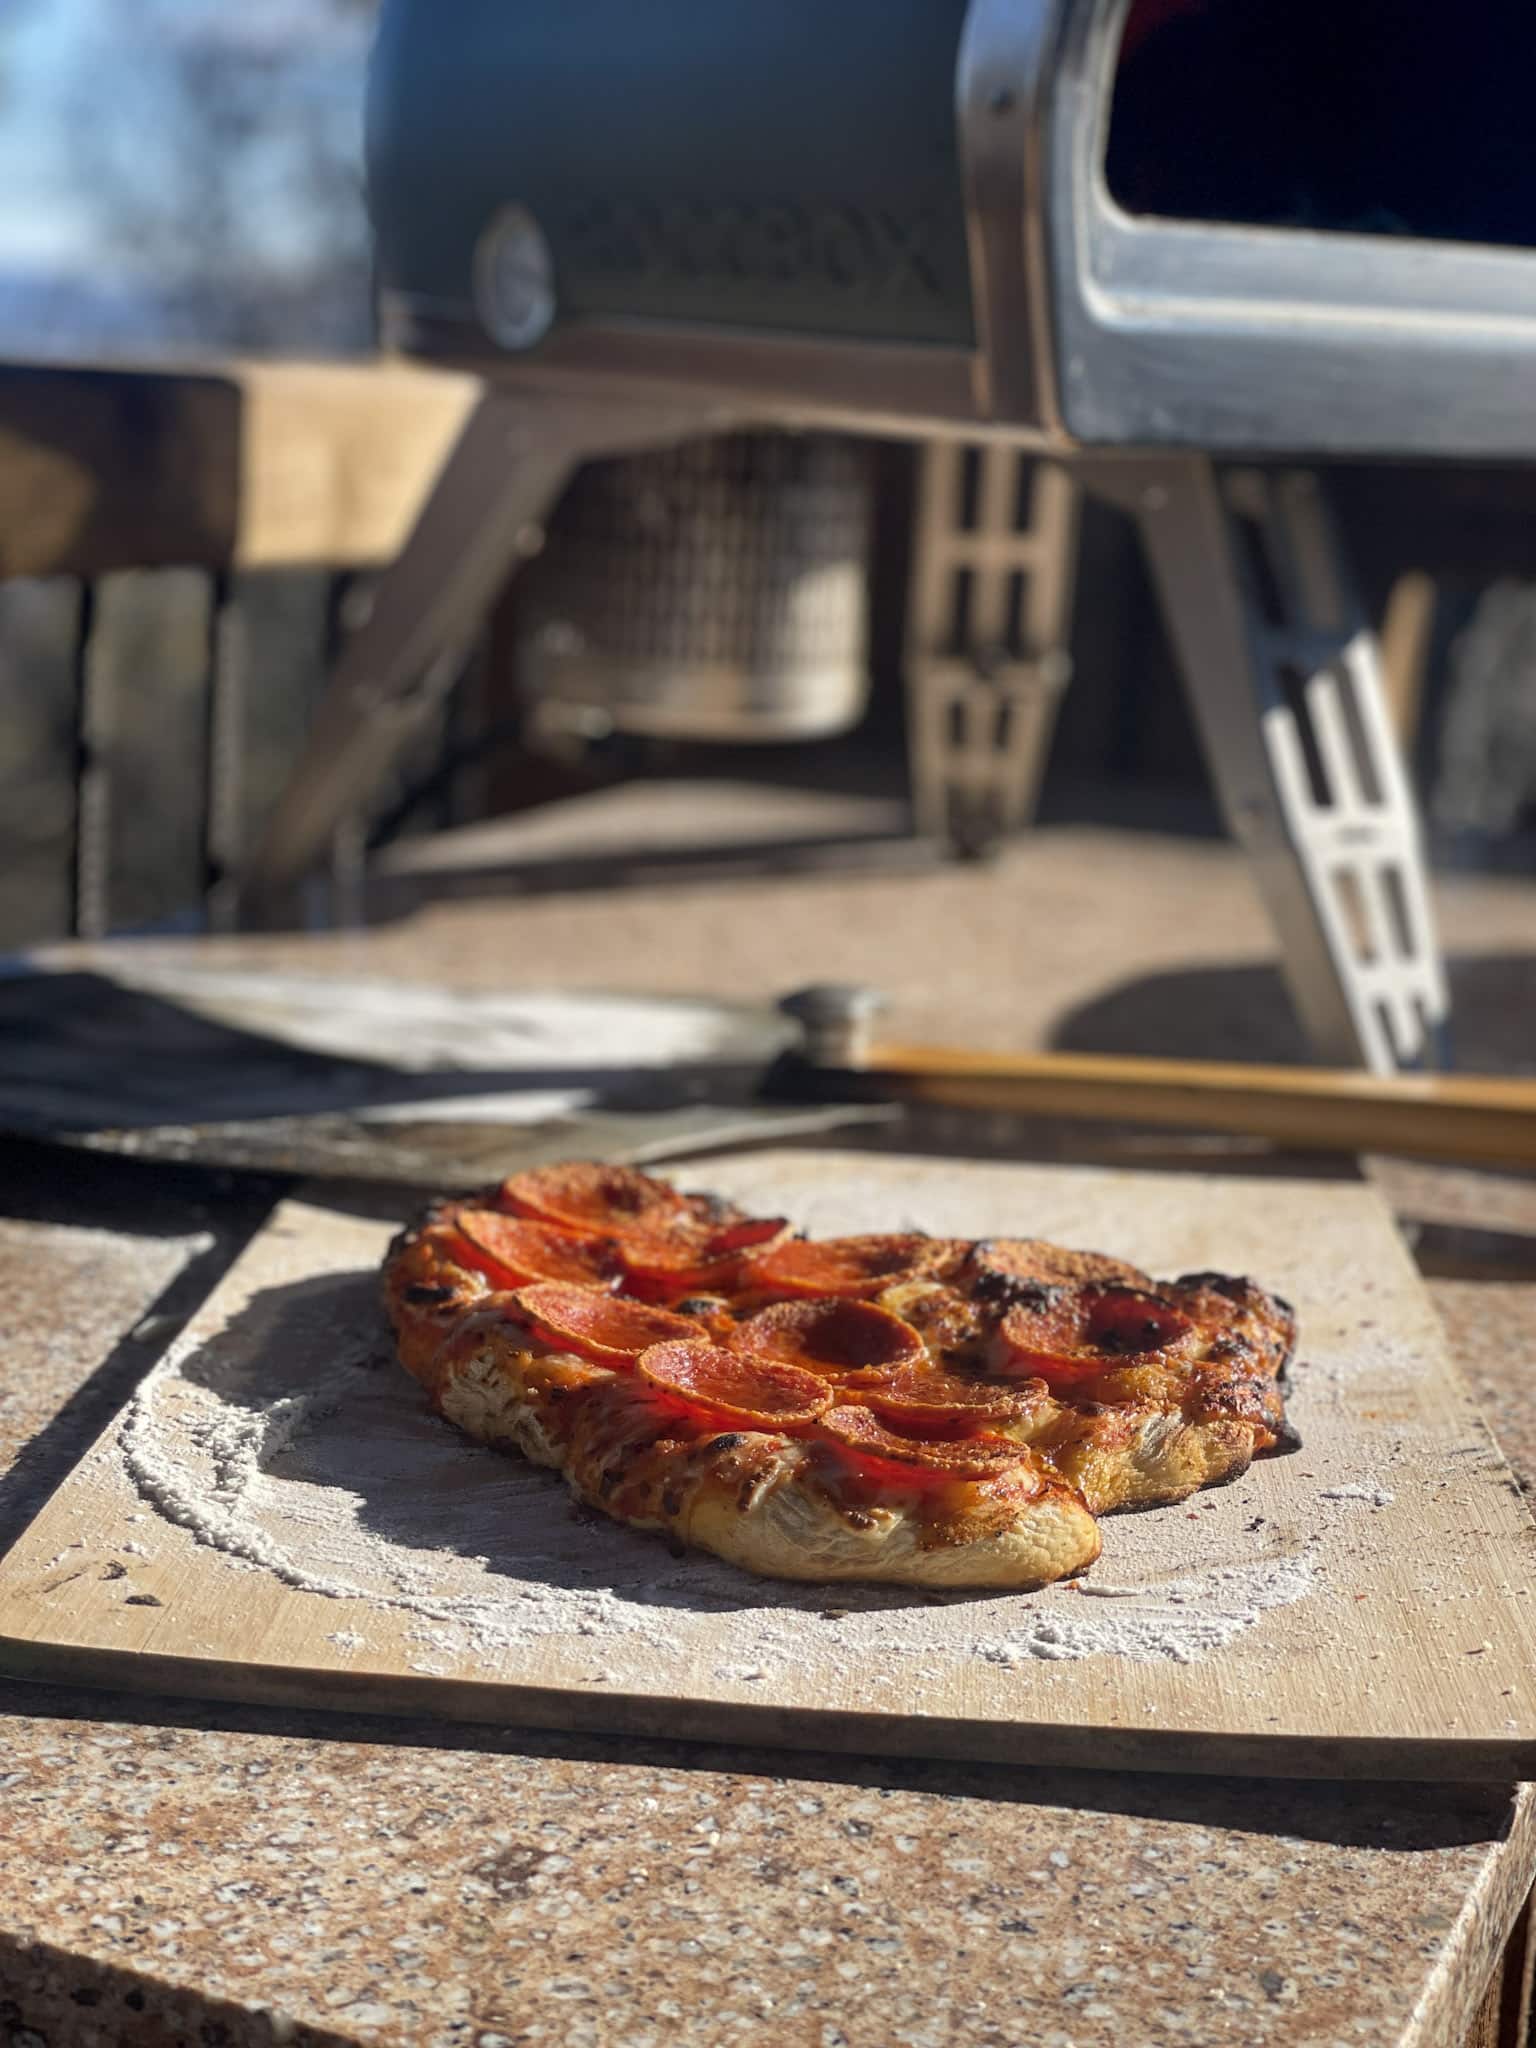 cooked pizza by pizza oven